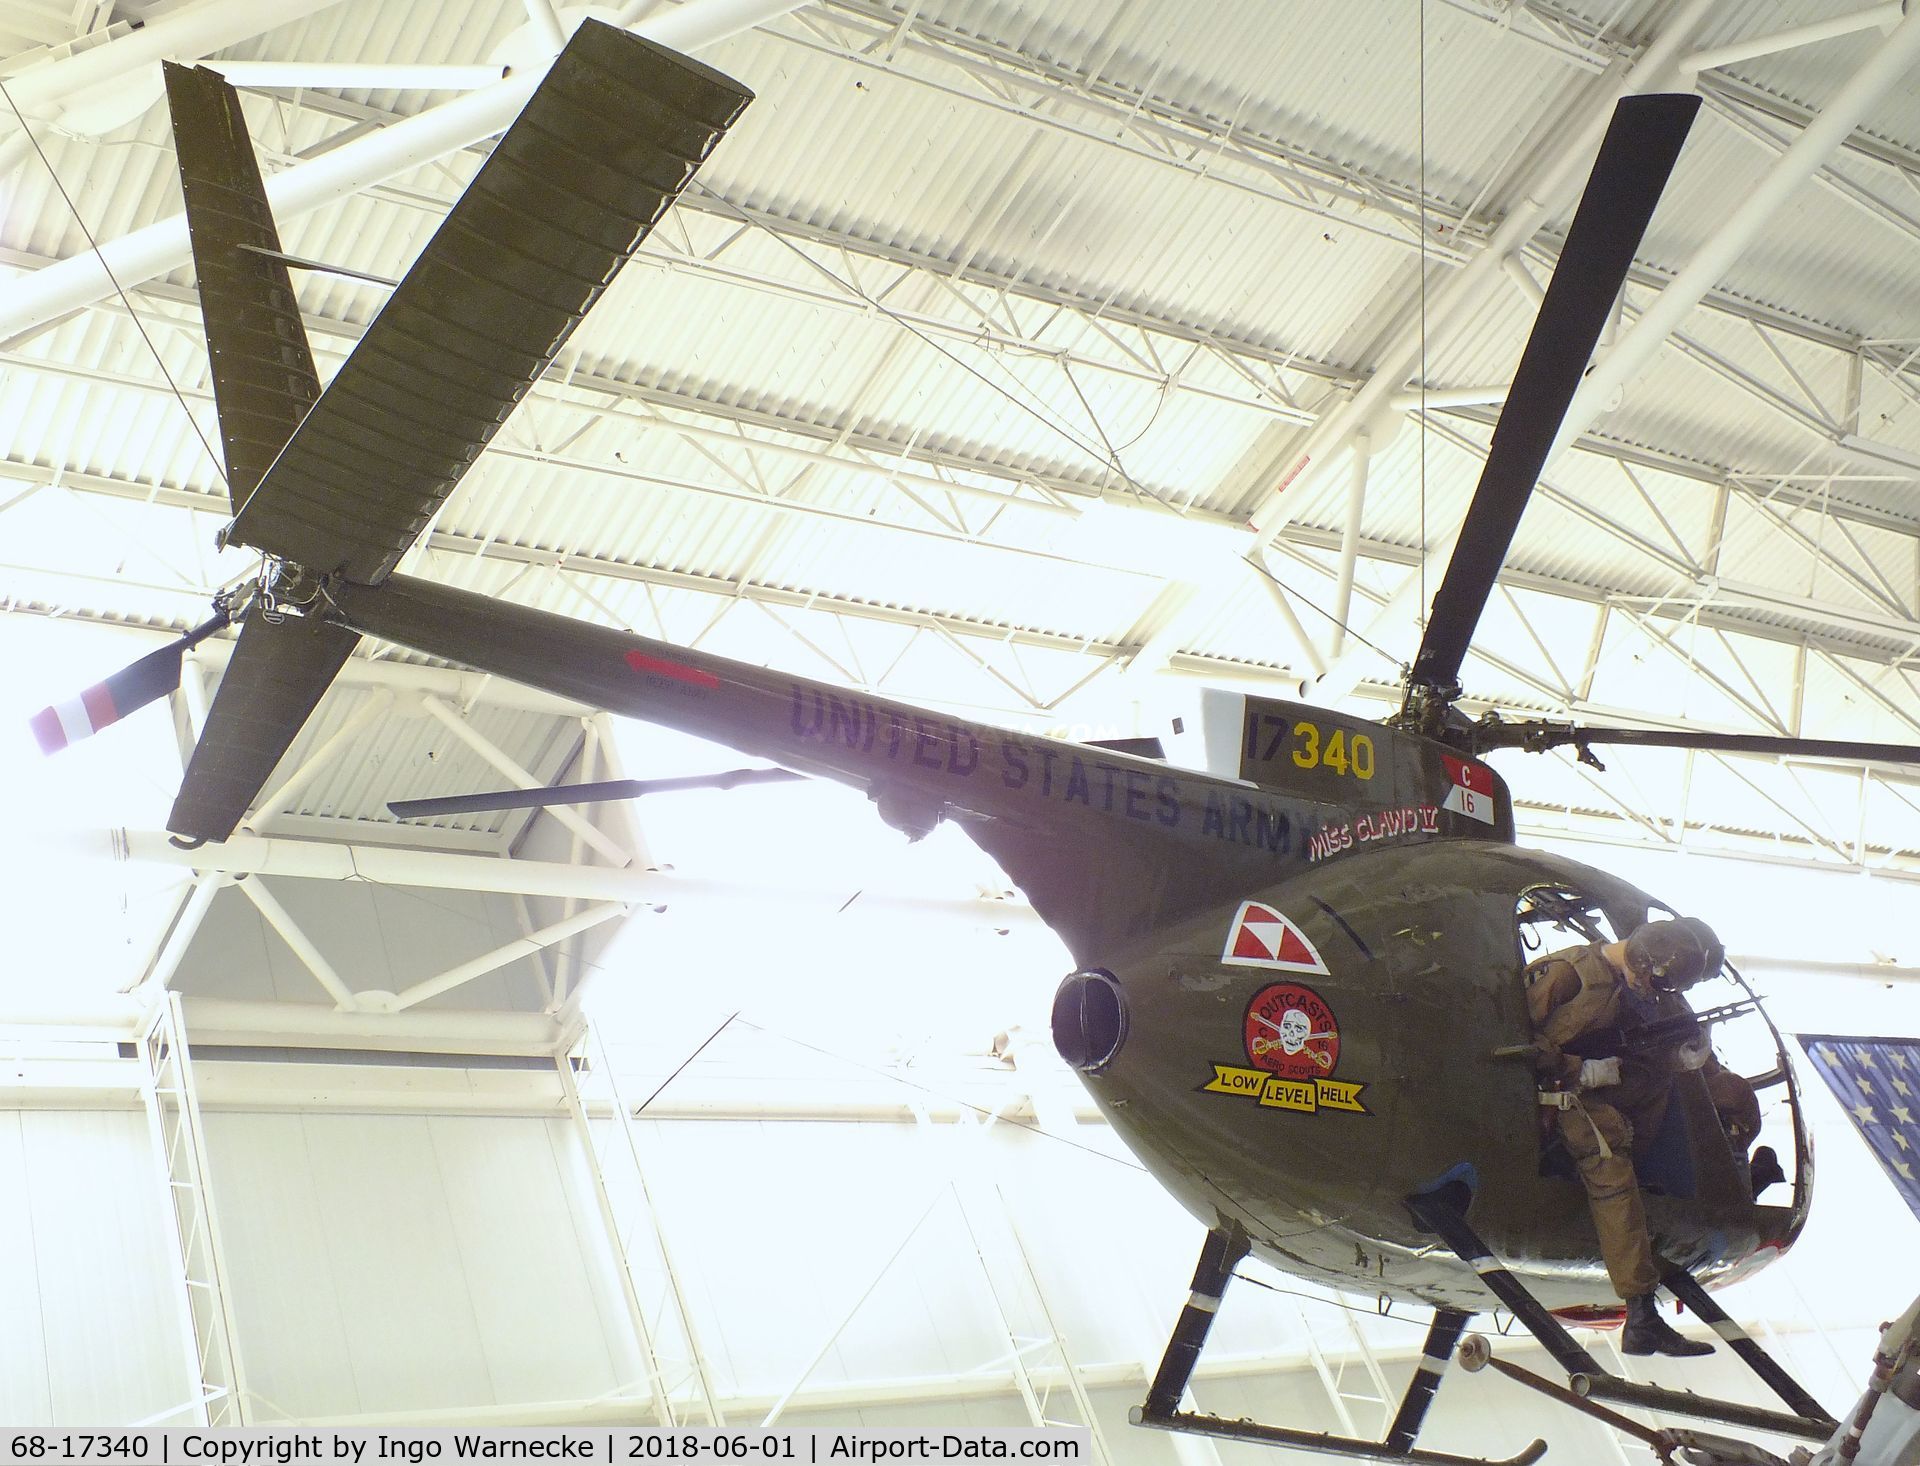 68-17340, 1968 Hughes OH-6A Cayuse C/N 1300, Hughes OH-6A Cayuse at the US Army Aviation Museum, Ft. Rucker